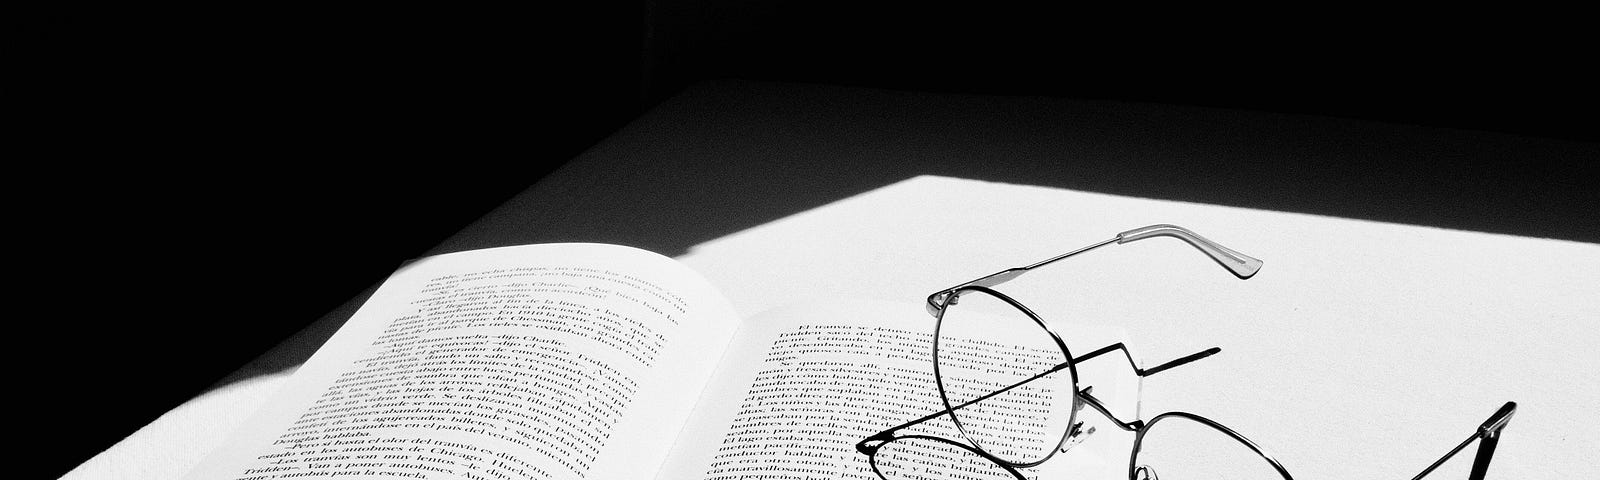 A black and white photo shows an open book lying flat on a surface bathed in sunlight. A pair of eyeglasses rests at an angle on part of the open book.